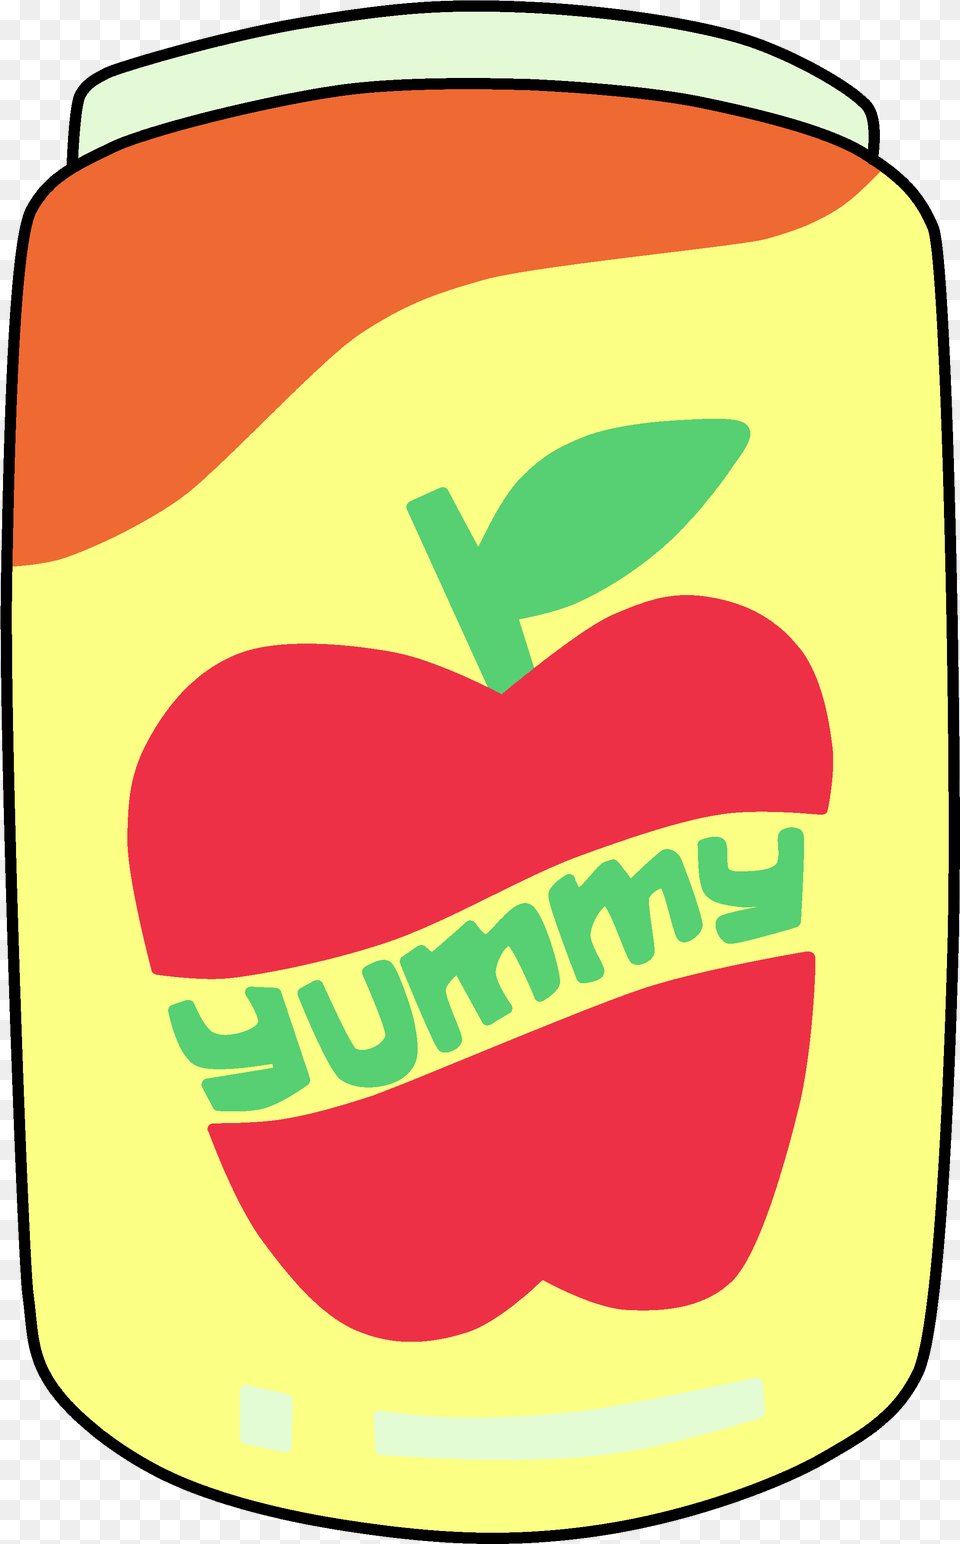 Death Star Shaped As An Apple Clipart Royalty Steven Universe Apple Juice, Food Free Transparent Png